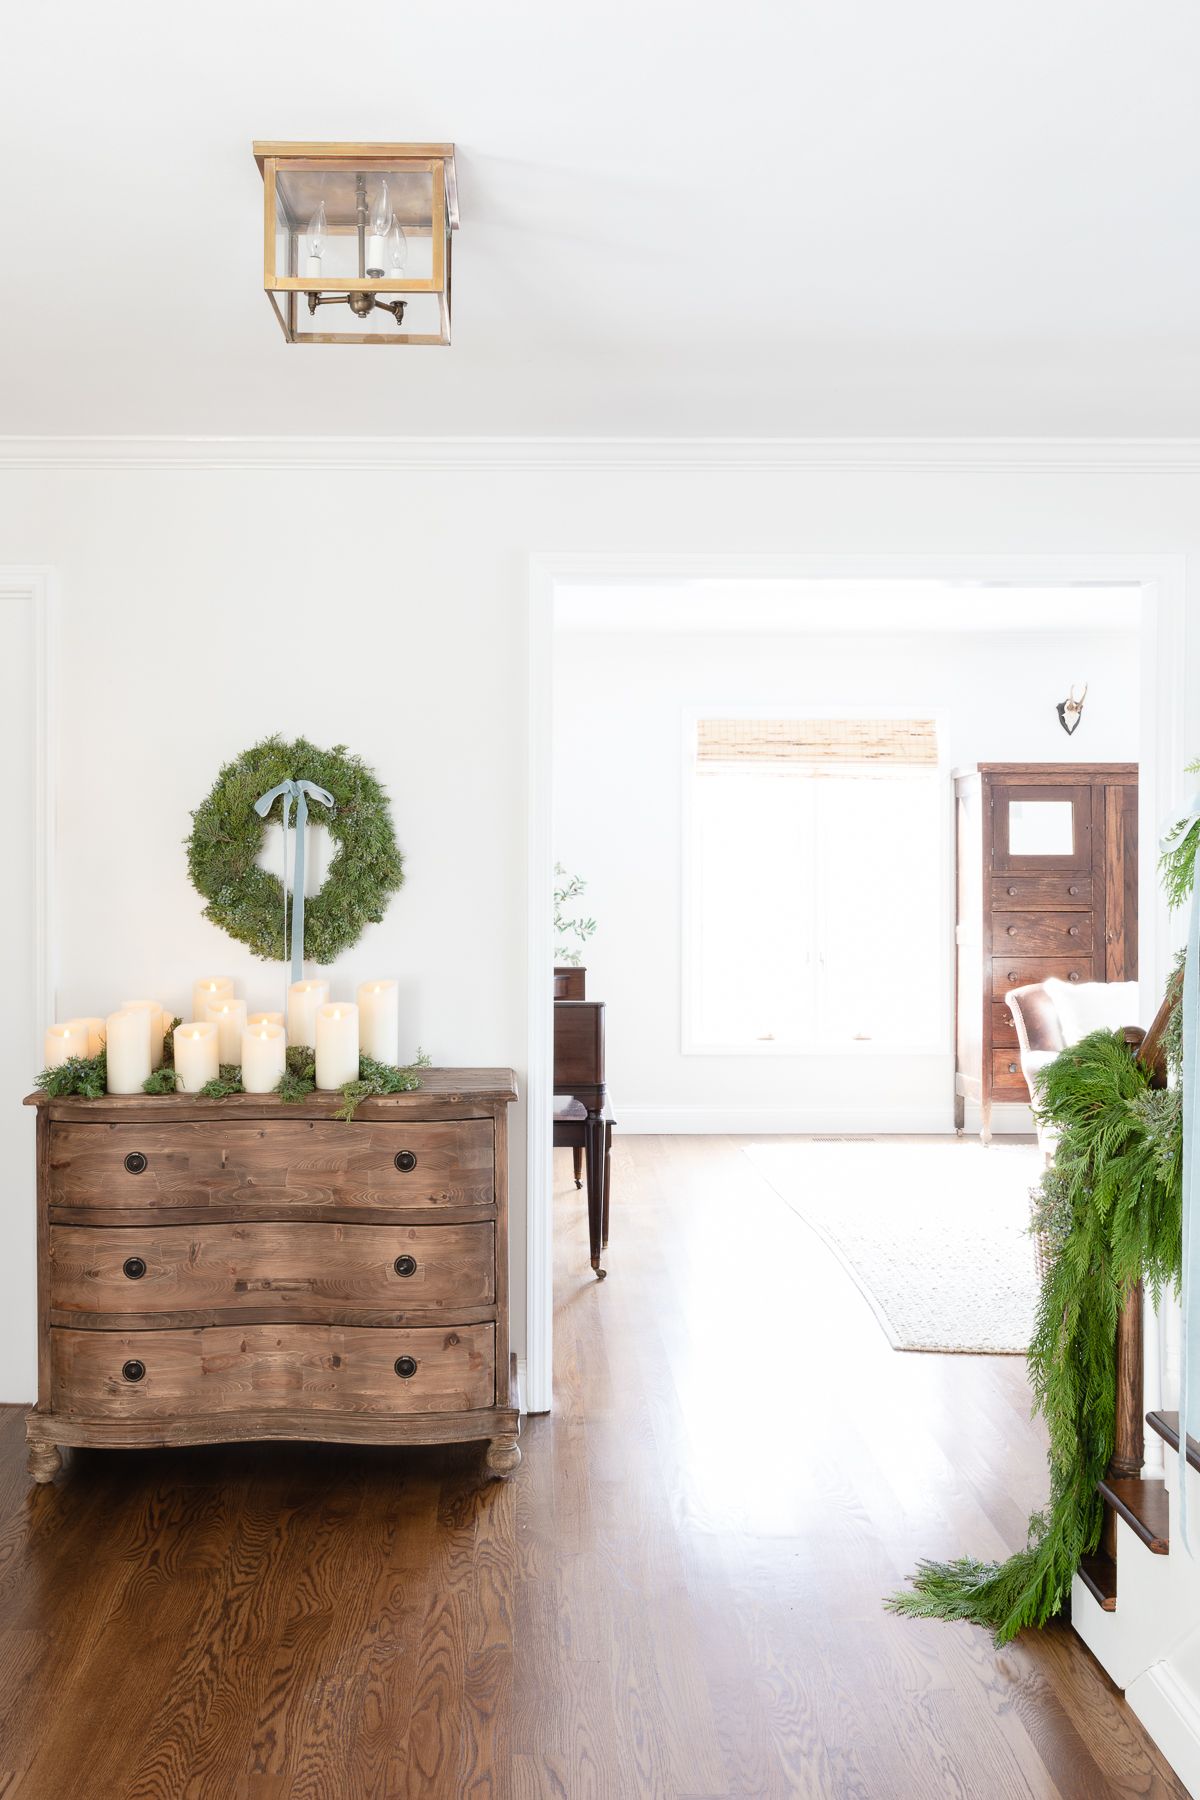 An entryway with a fresh cedar garland on the stairs and a fresh wreath over a chest of drawers.